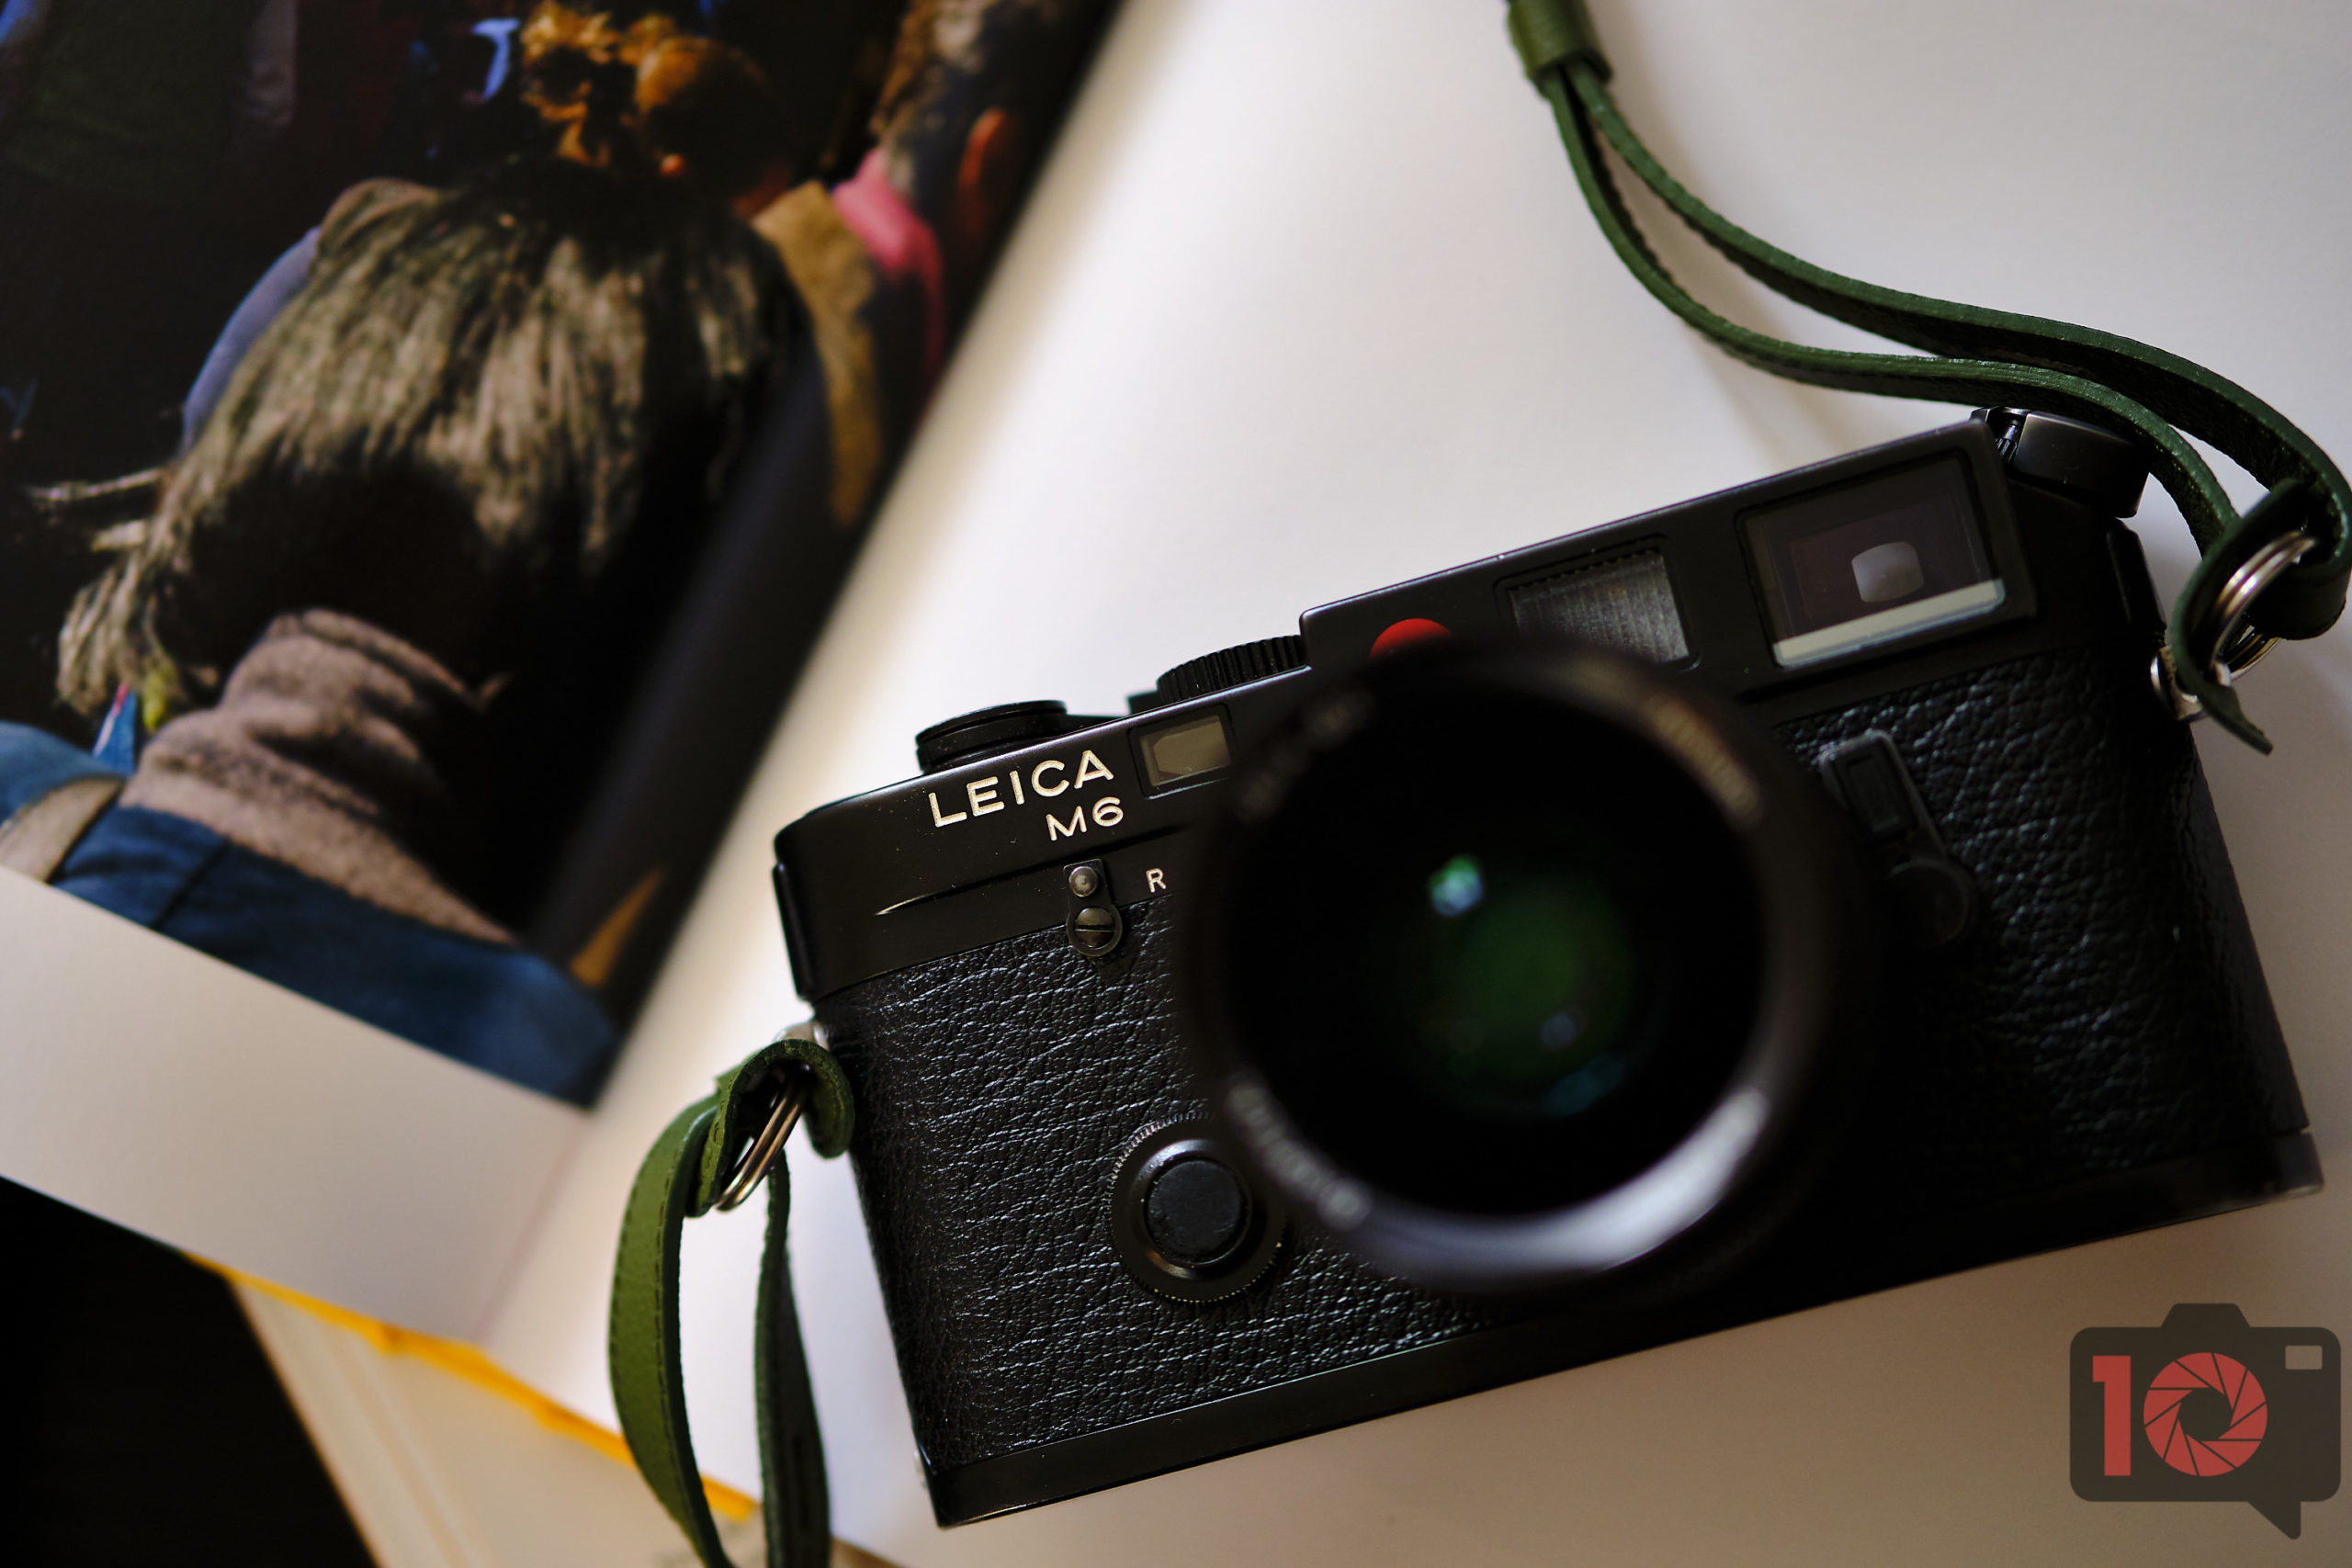 You’ll Want to Read This If You’re Planning on Buying a Vintage Camera